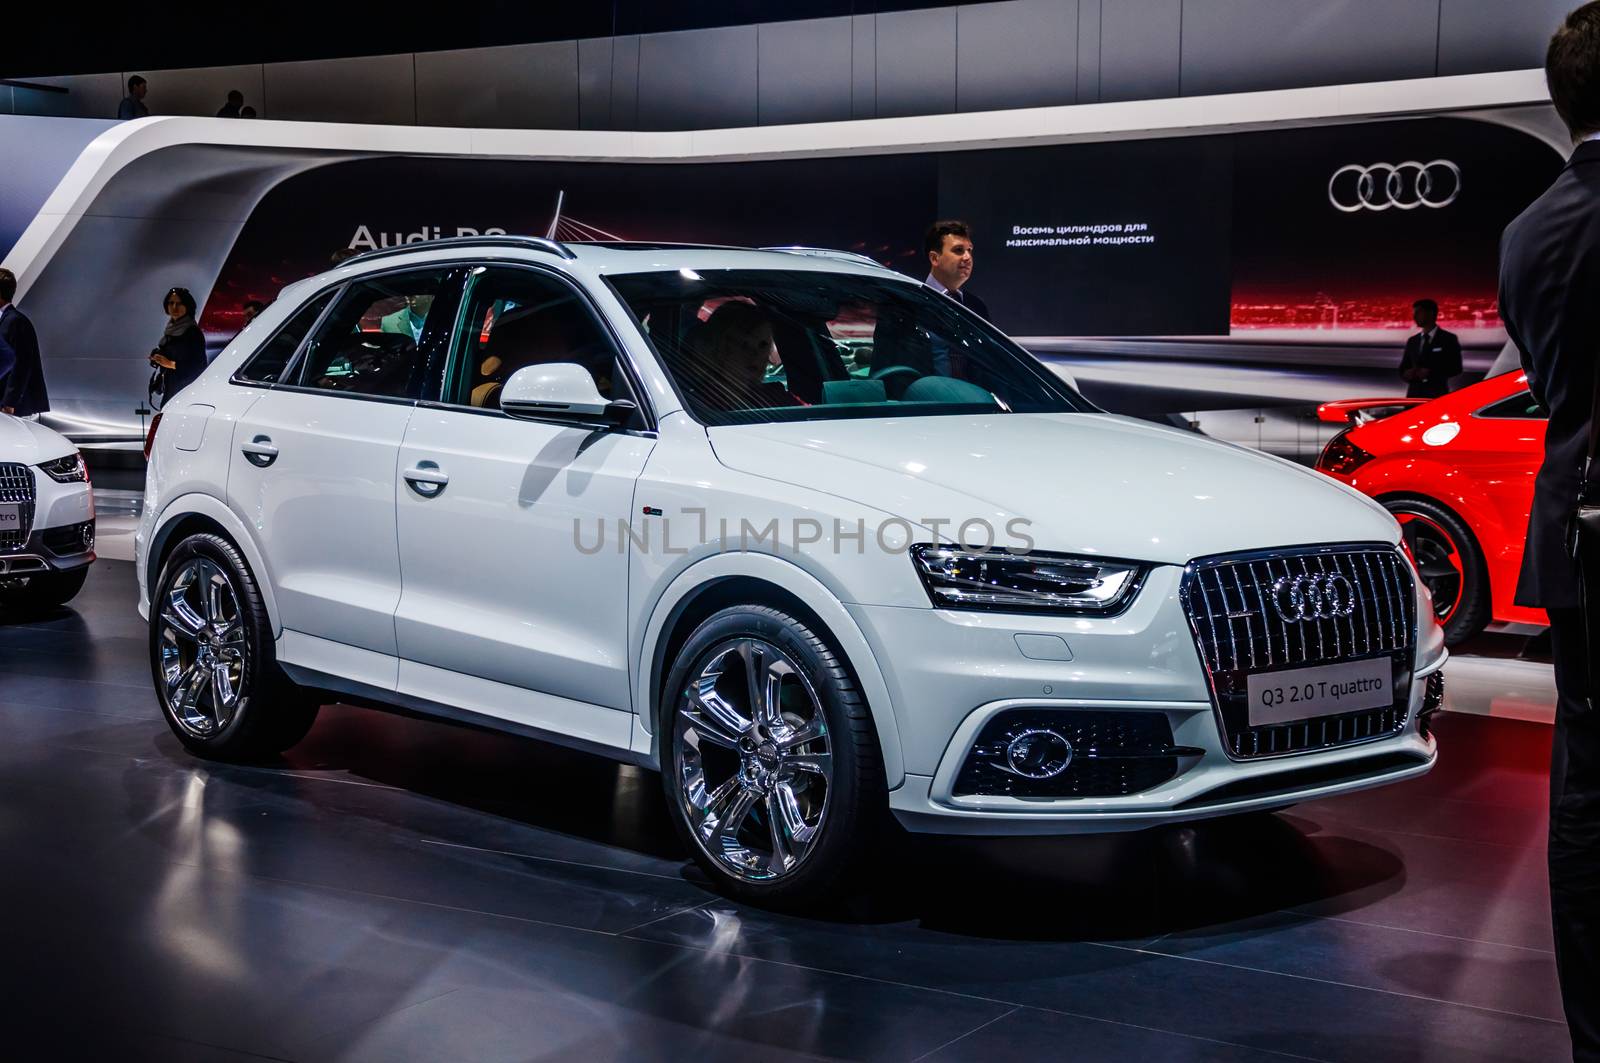 MOSCOW, RUSSIA - AUG 2012: AUDI Q3 2.0 T QUATTRO presented as world premiere at the 16th MIAS (Moscow International Automobile Salon) on August 30, 2012 in Moscow, Russia